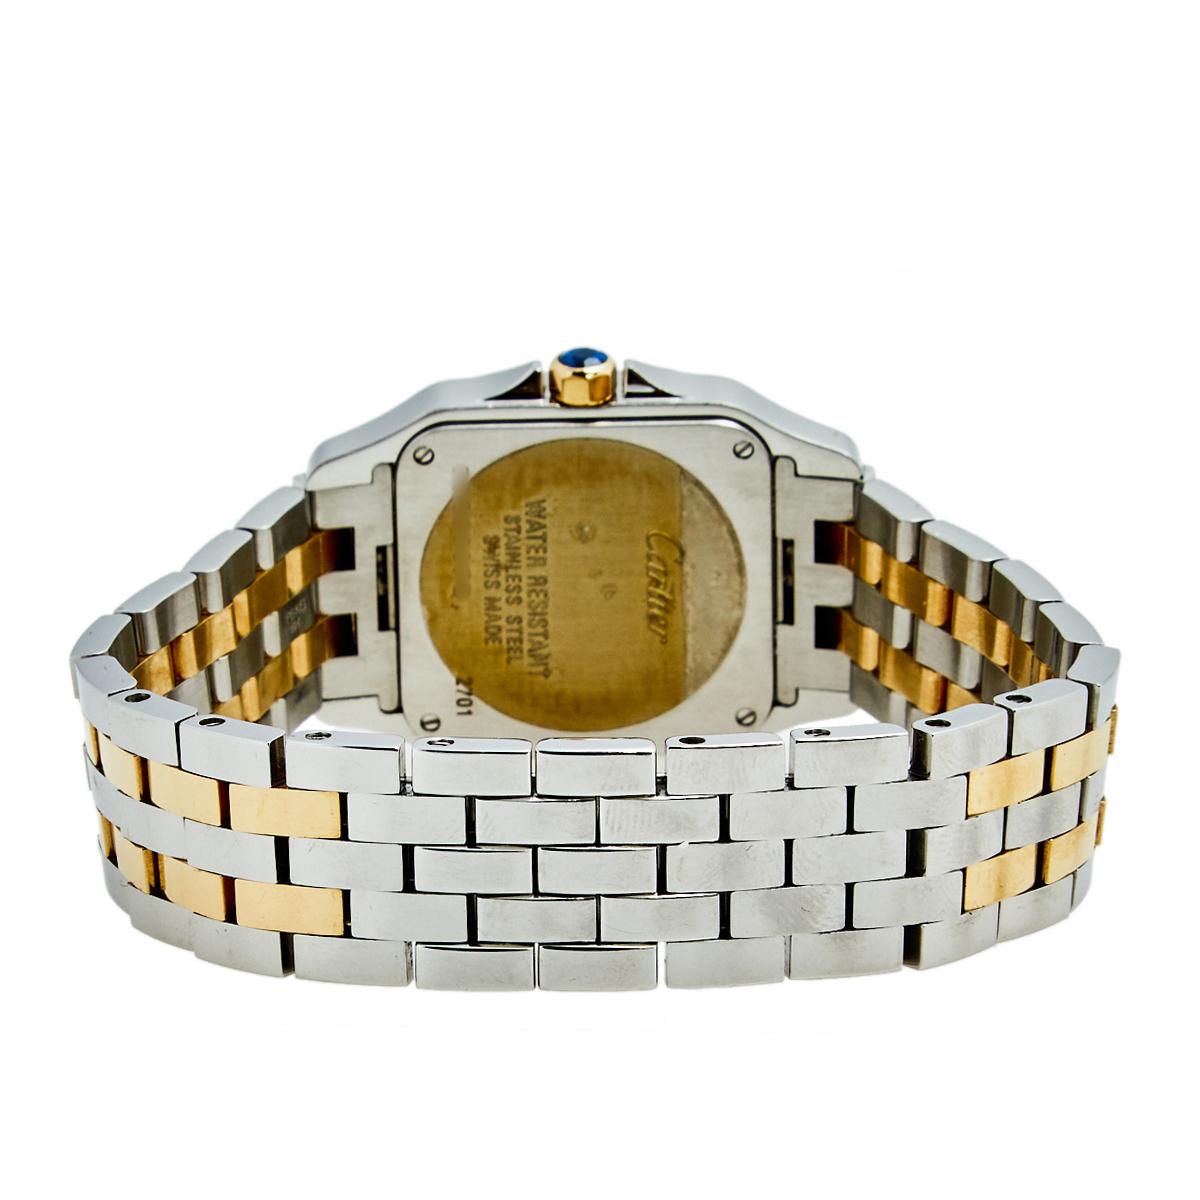 We have our eyes on this Cartier wristwatch for all the right reasons. The Santos Demoiselle timepiece is made of 18k yellow gold and stainless steel. It has a square case and a cream dial detailed with Roman numeral hour markers, blue hands, and a